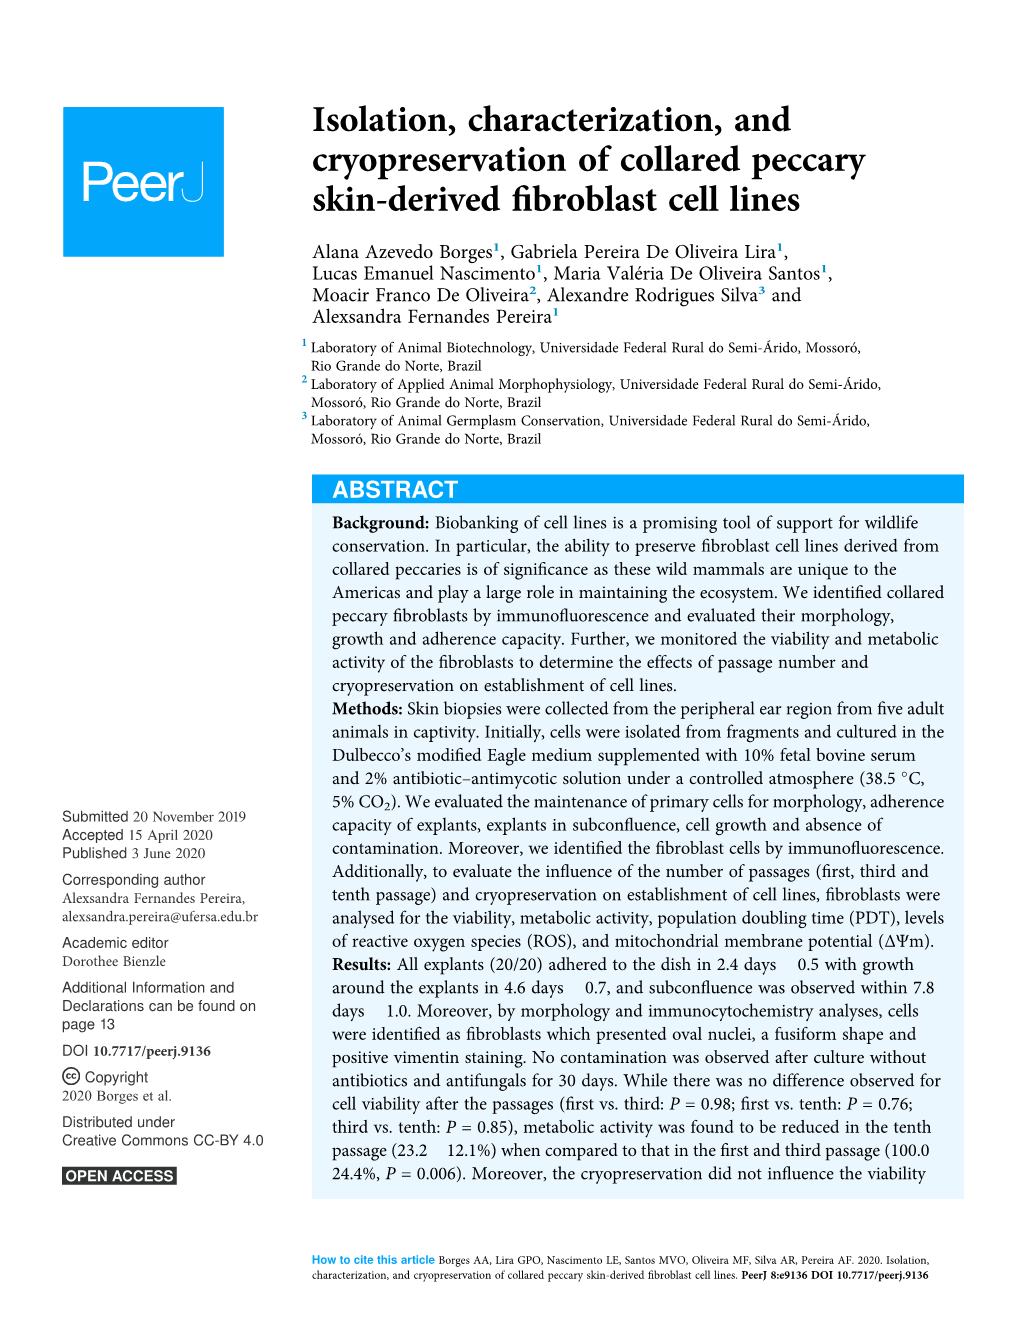 Isolation, Characterization, and Cryopreservation of Collared Peccary Skin-Derived ﬁbroblast Cell Lines